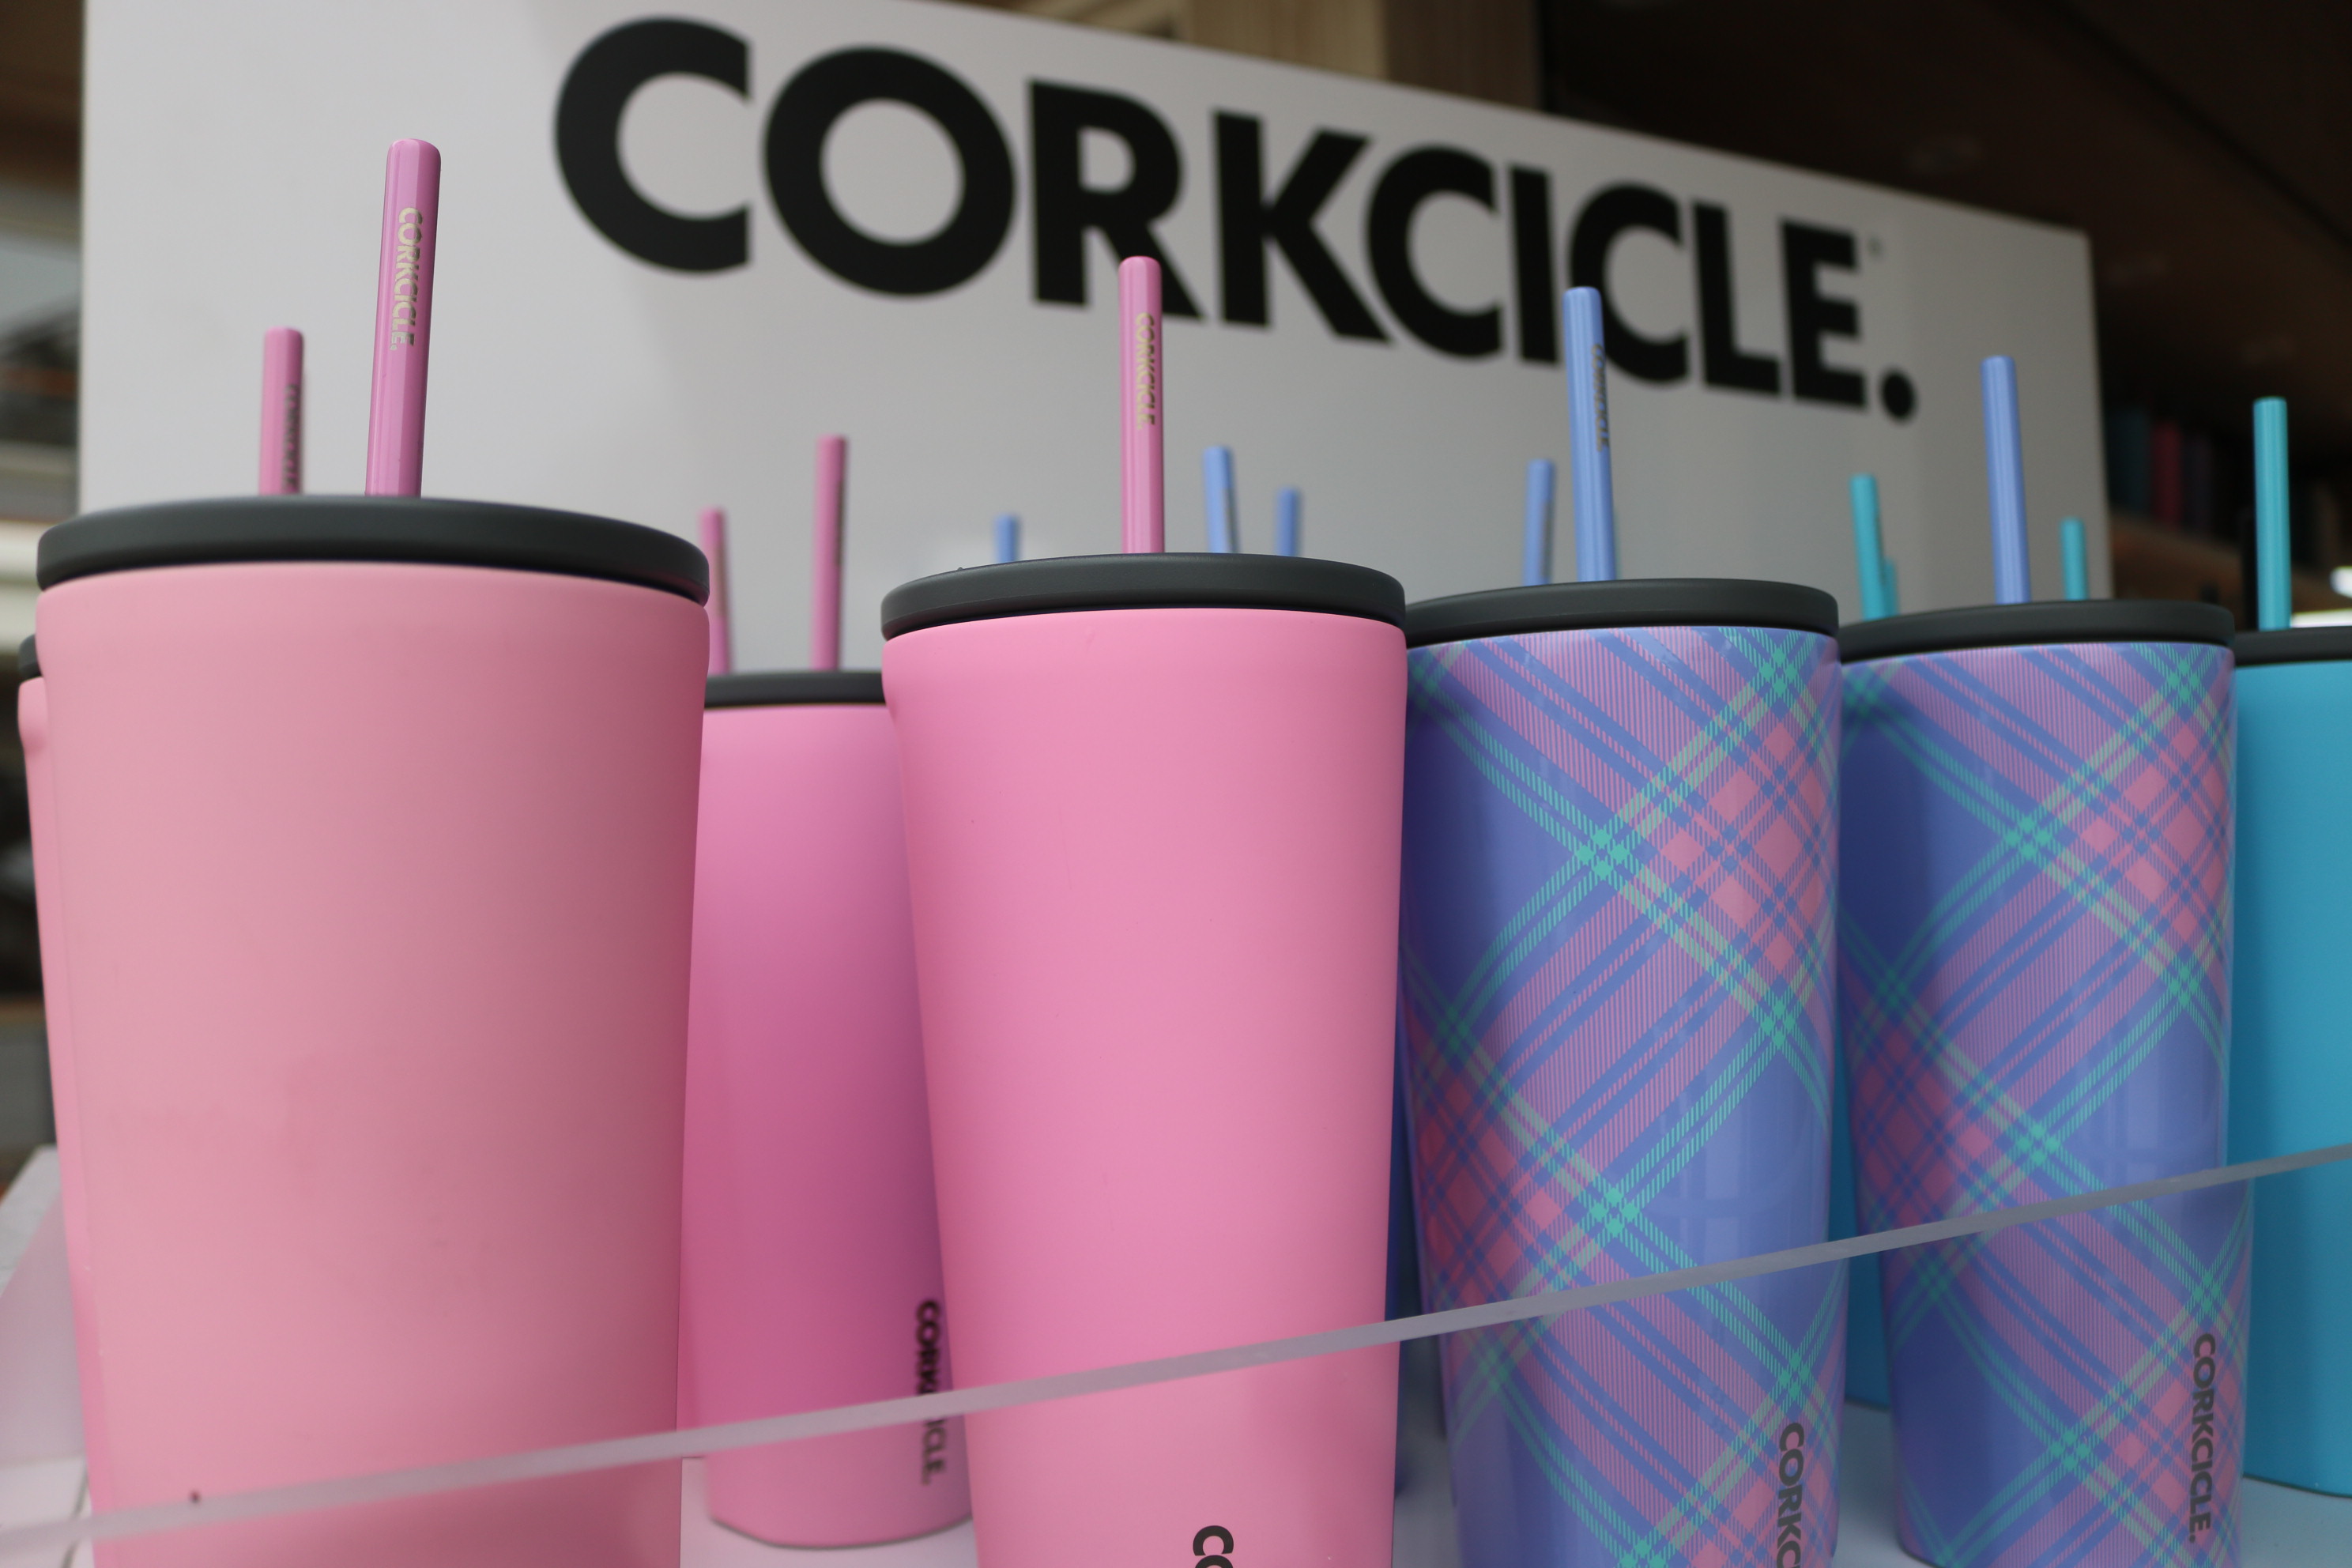 Corkcicle at Disney Springs overview - Photo 4 of 11